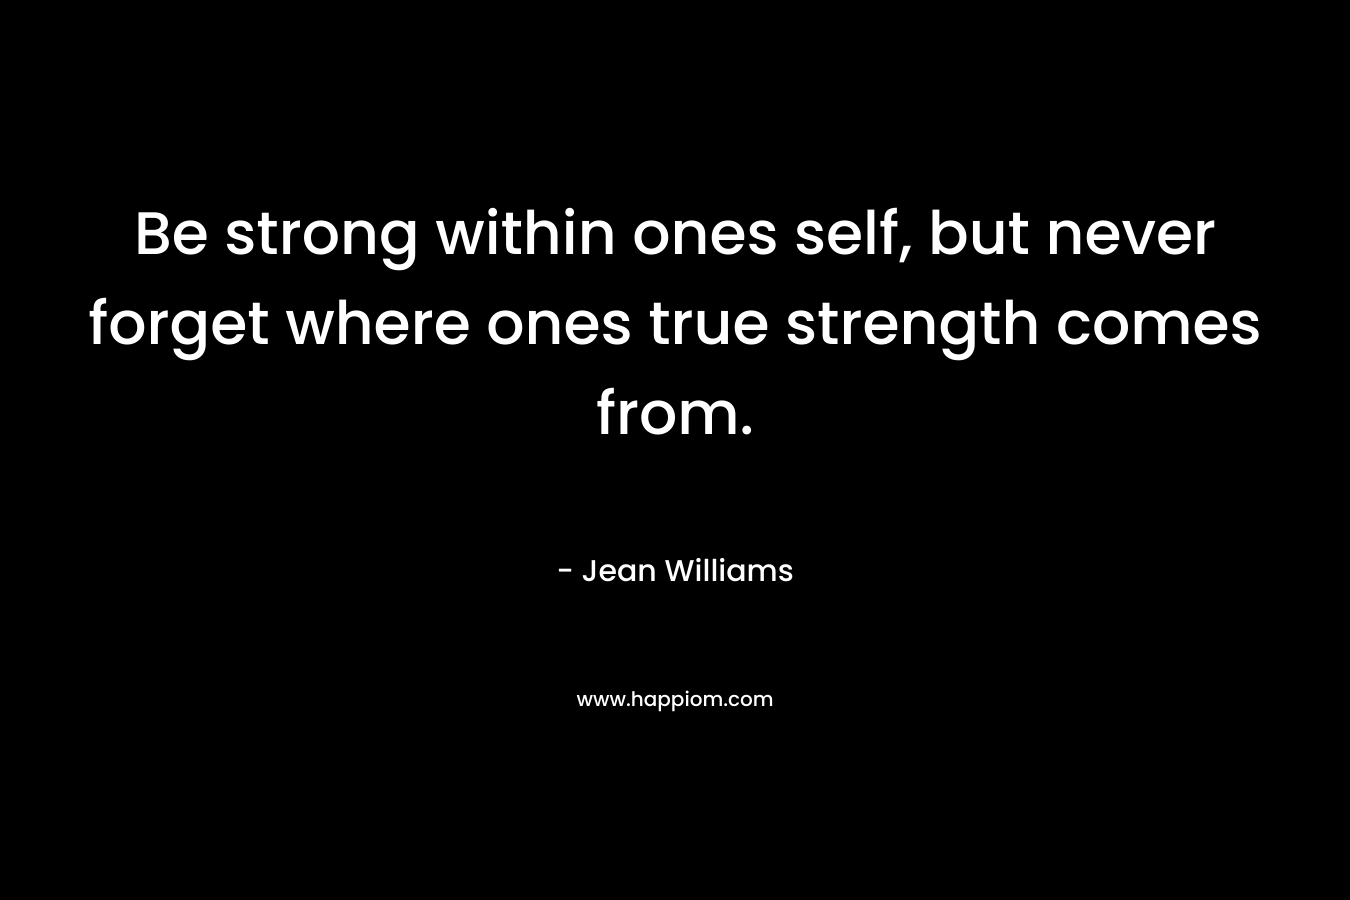 Be strong within ones self, but never forget where ones true strength comes from.